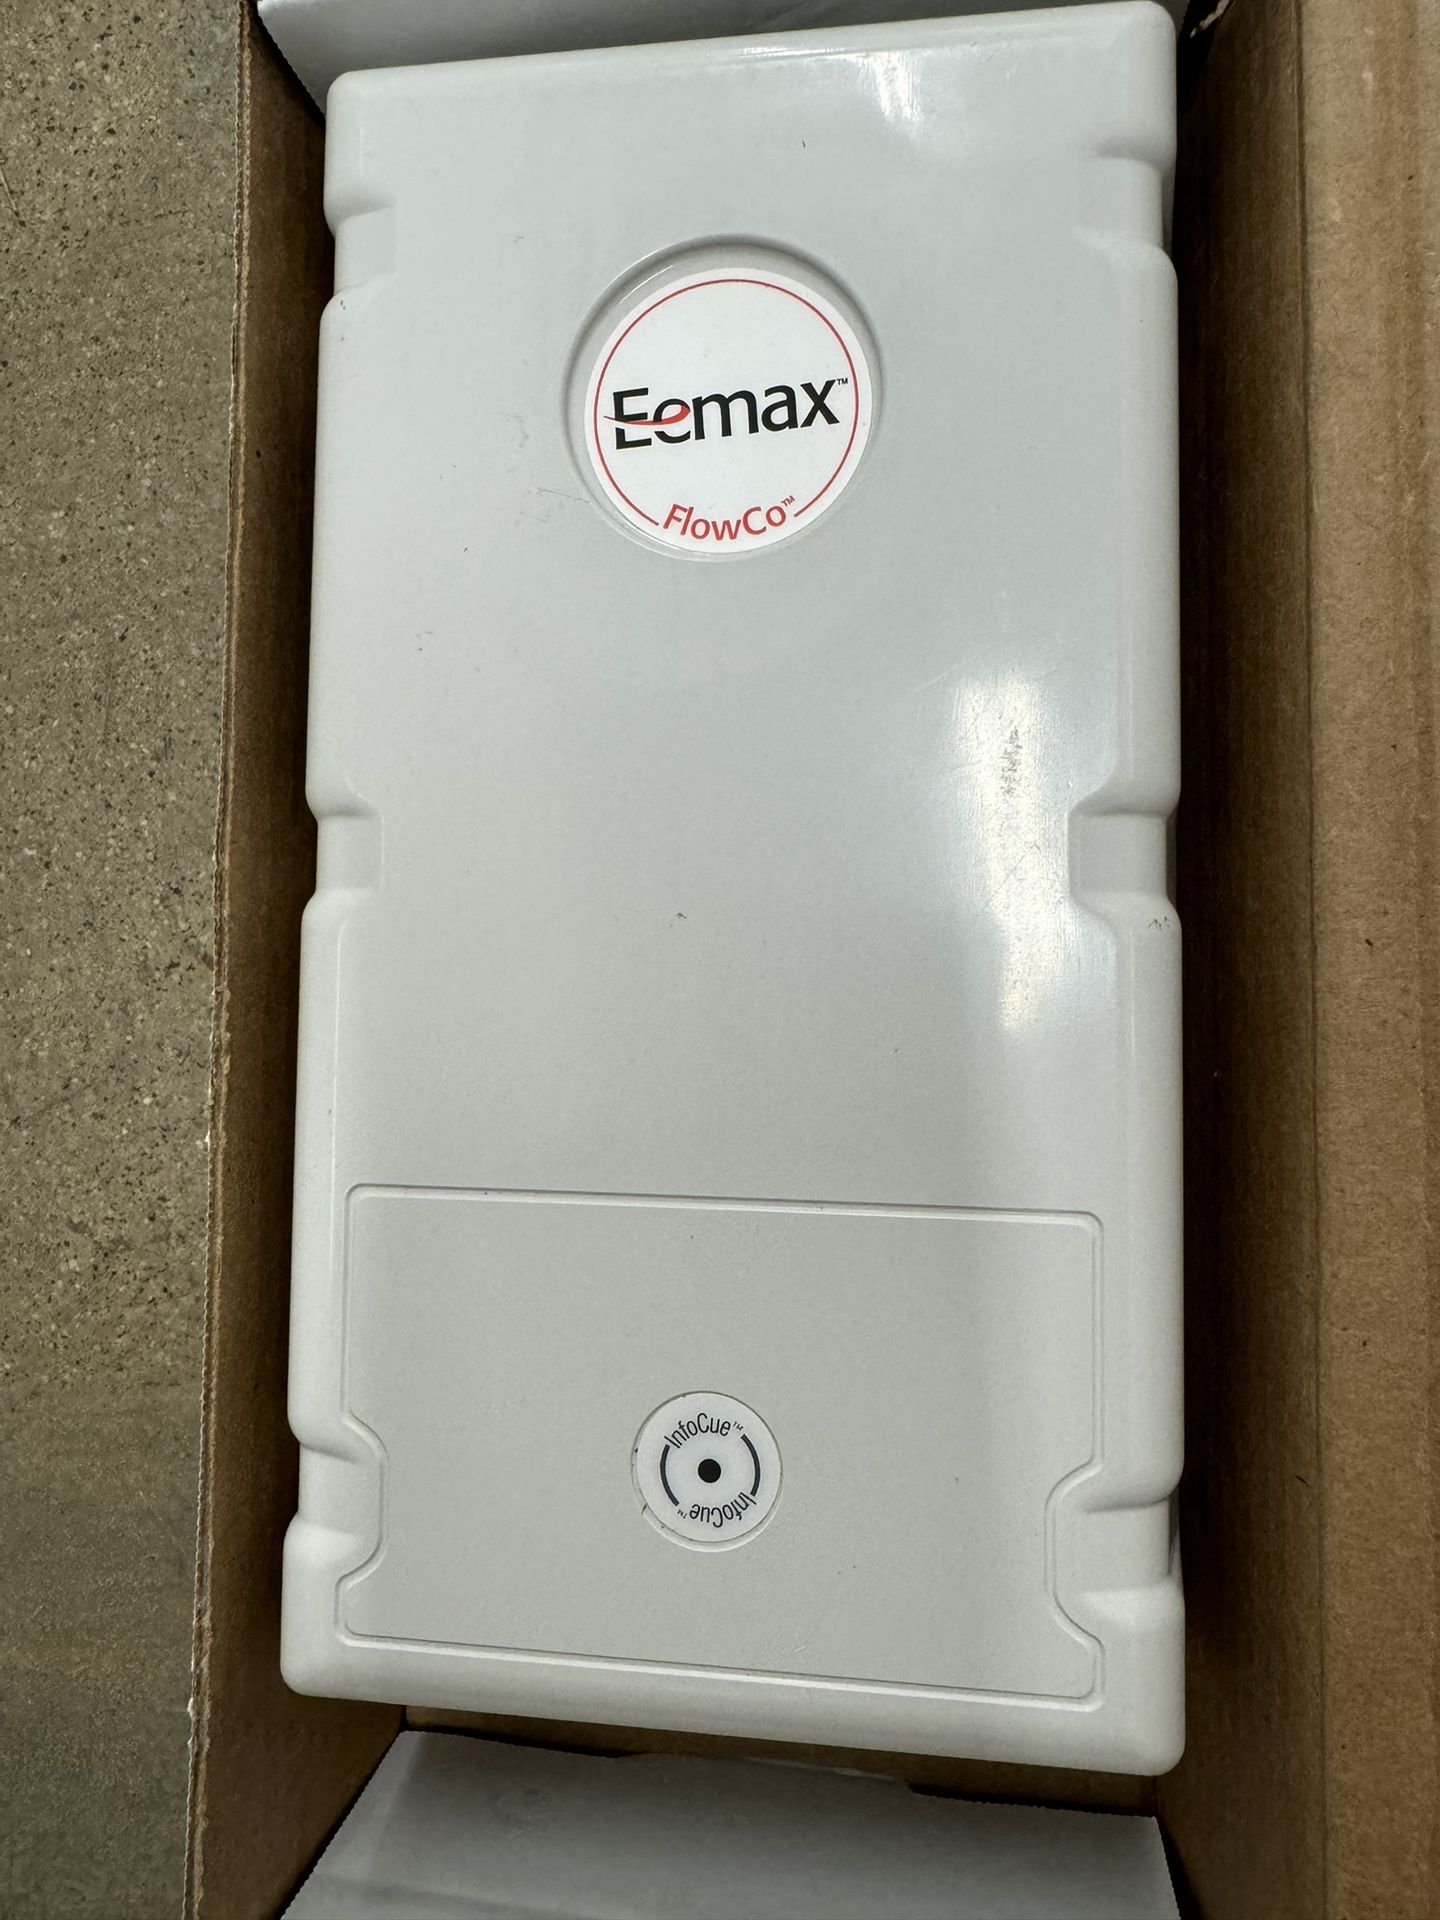 EeMax SPEX4208, FlowCo Point-of-Use Tankless Electric Water Heater, 4.1kW, 208V